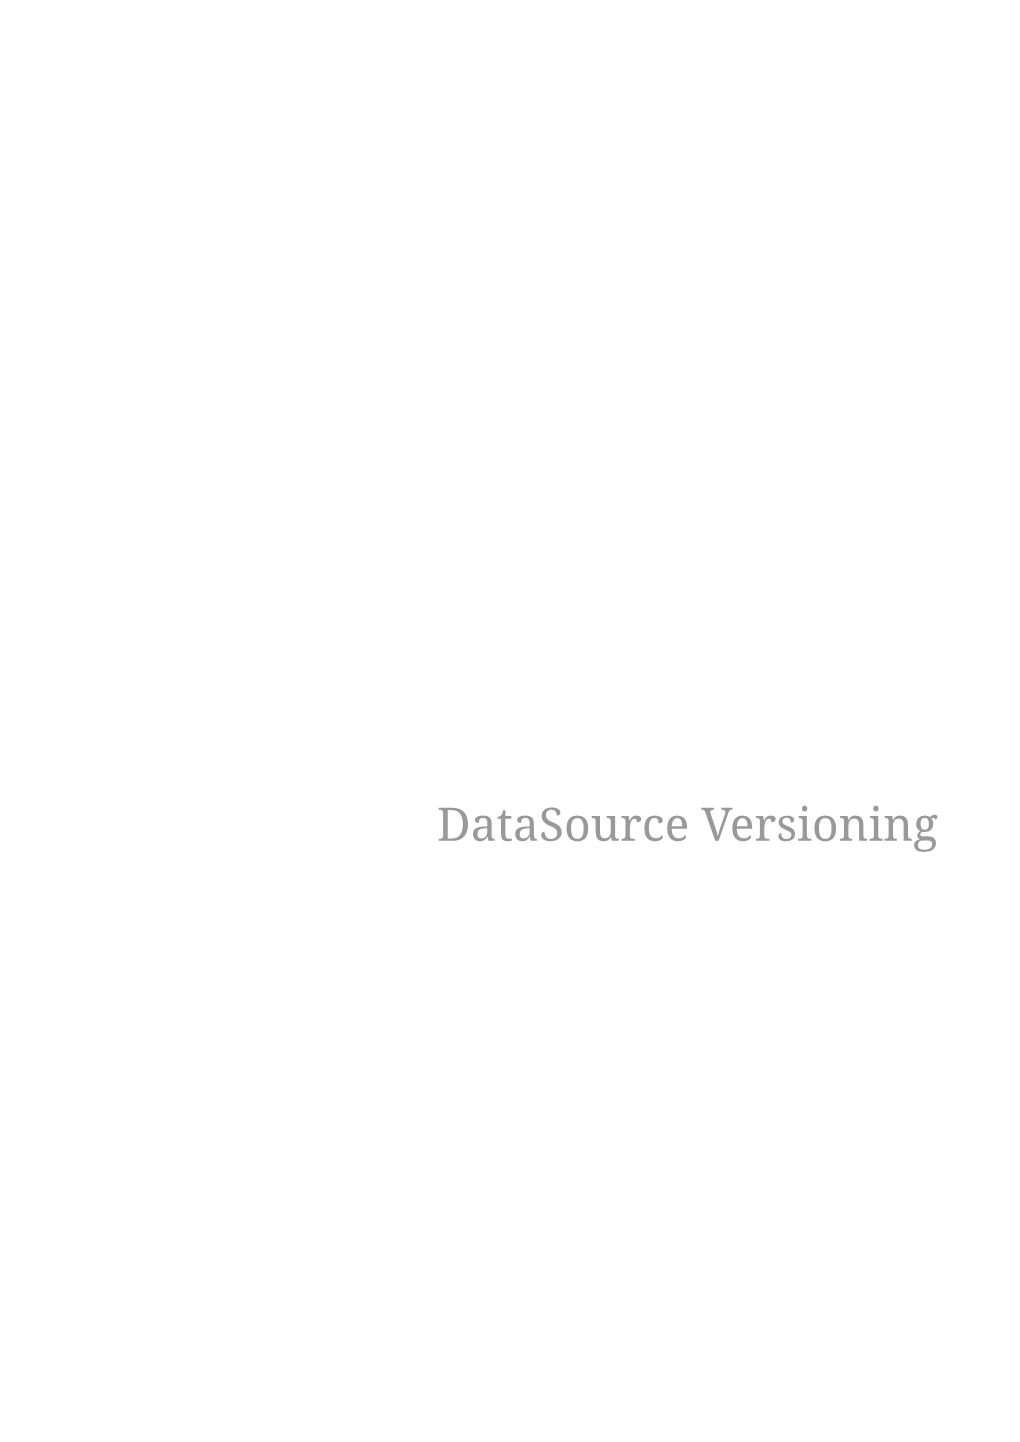 Datasource Versioning Example Datasource-Versioning Can Be Browsed At